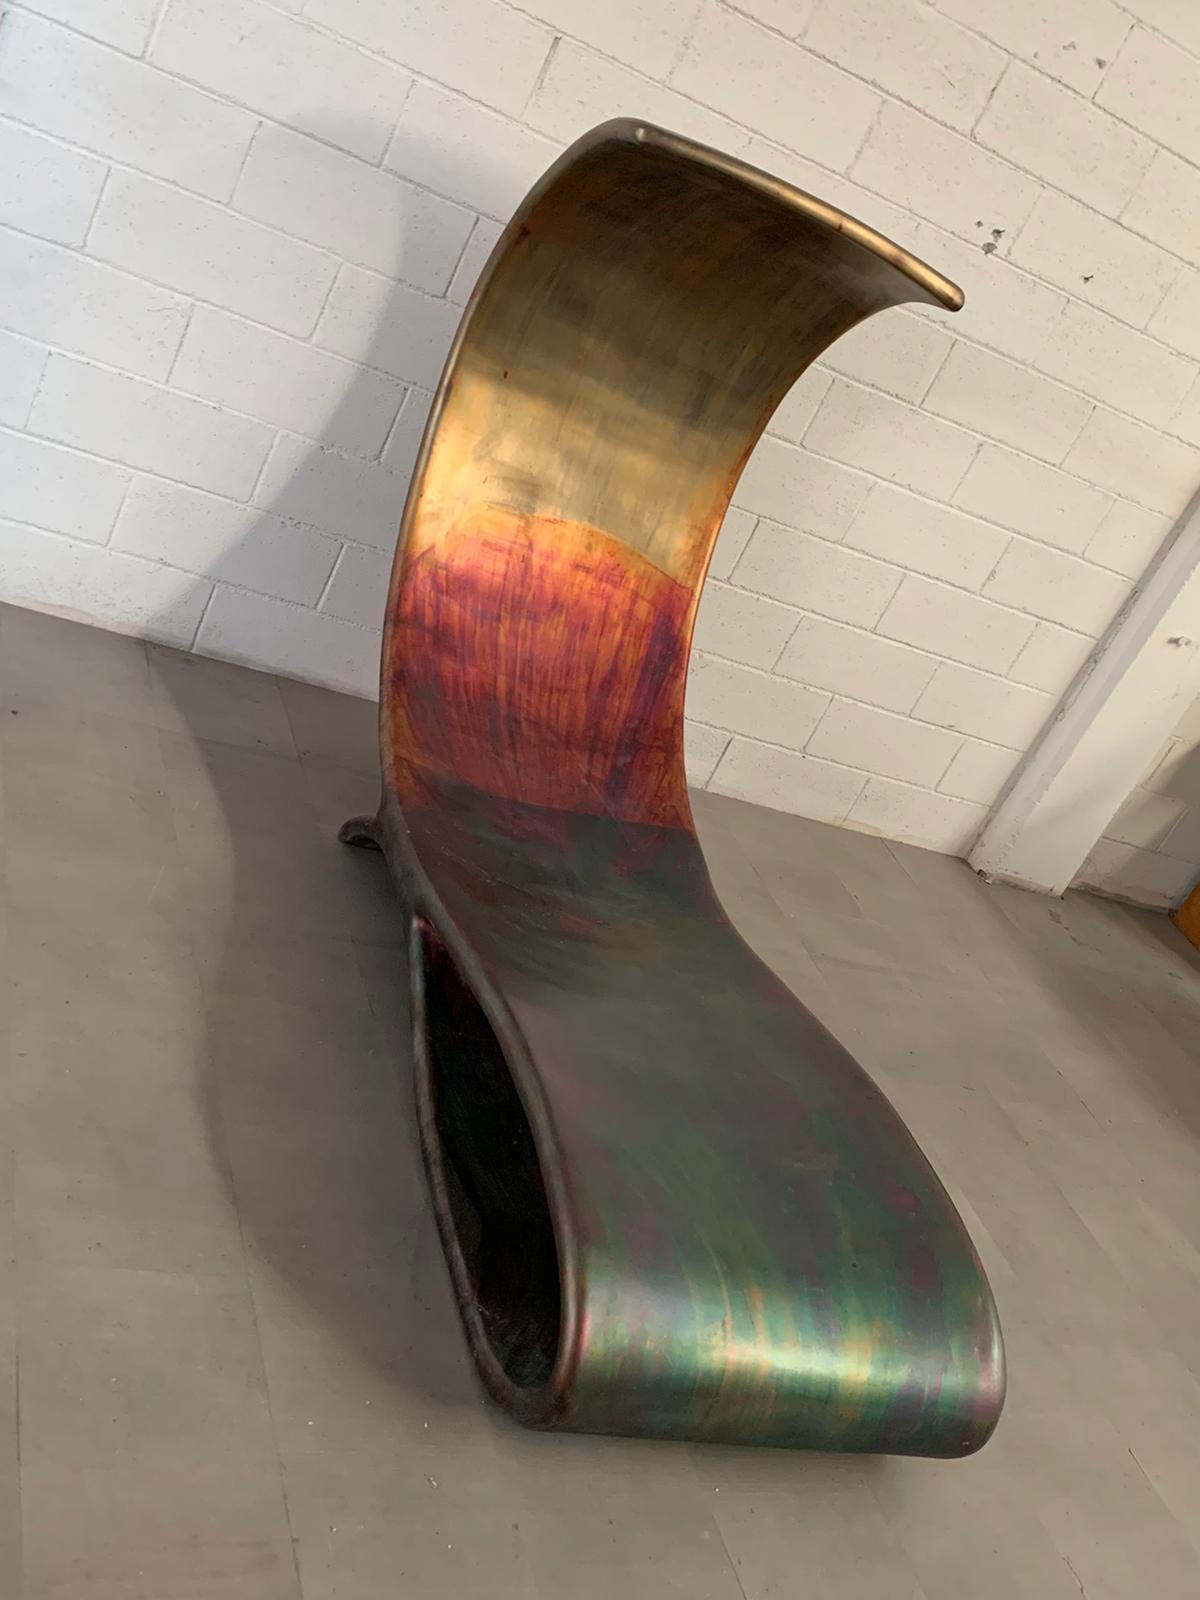 Late 20th Century Fiberglass & Copper Chaise Lounge by Ravi Sing for Marco Polo Italia, 1990s For Sale